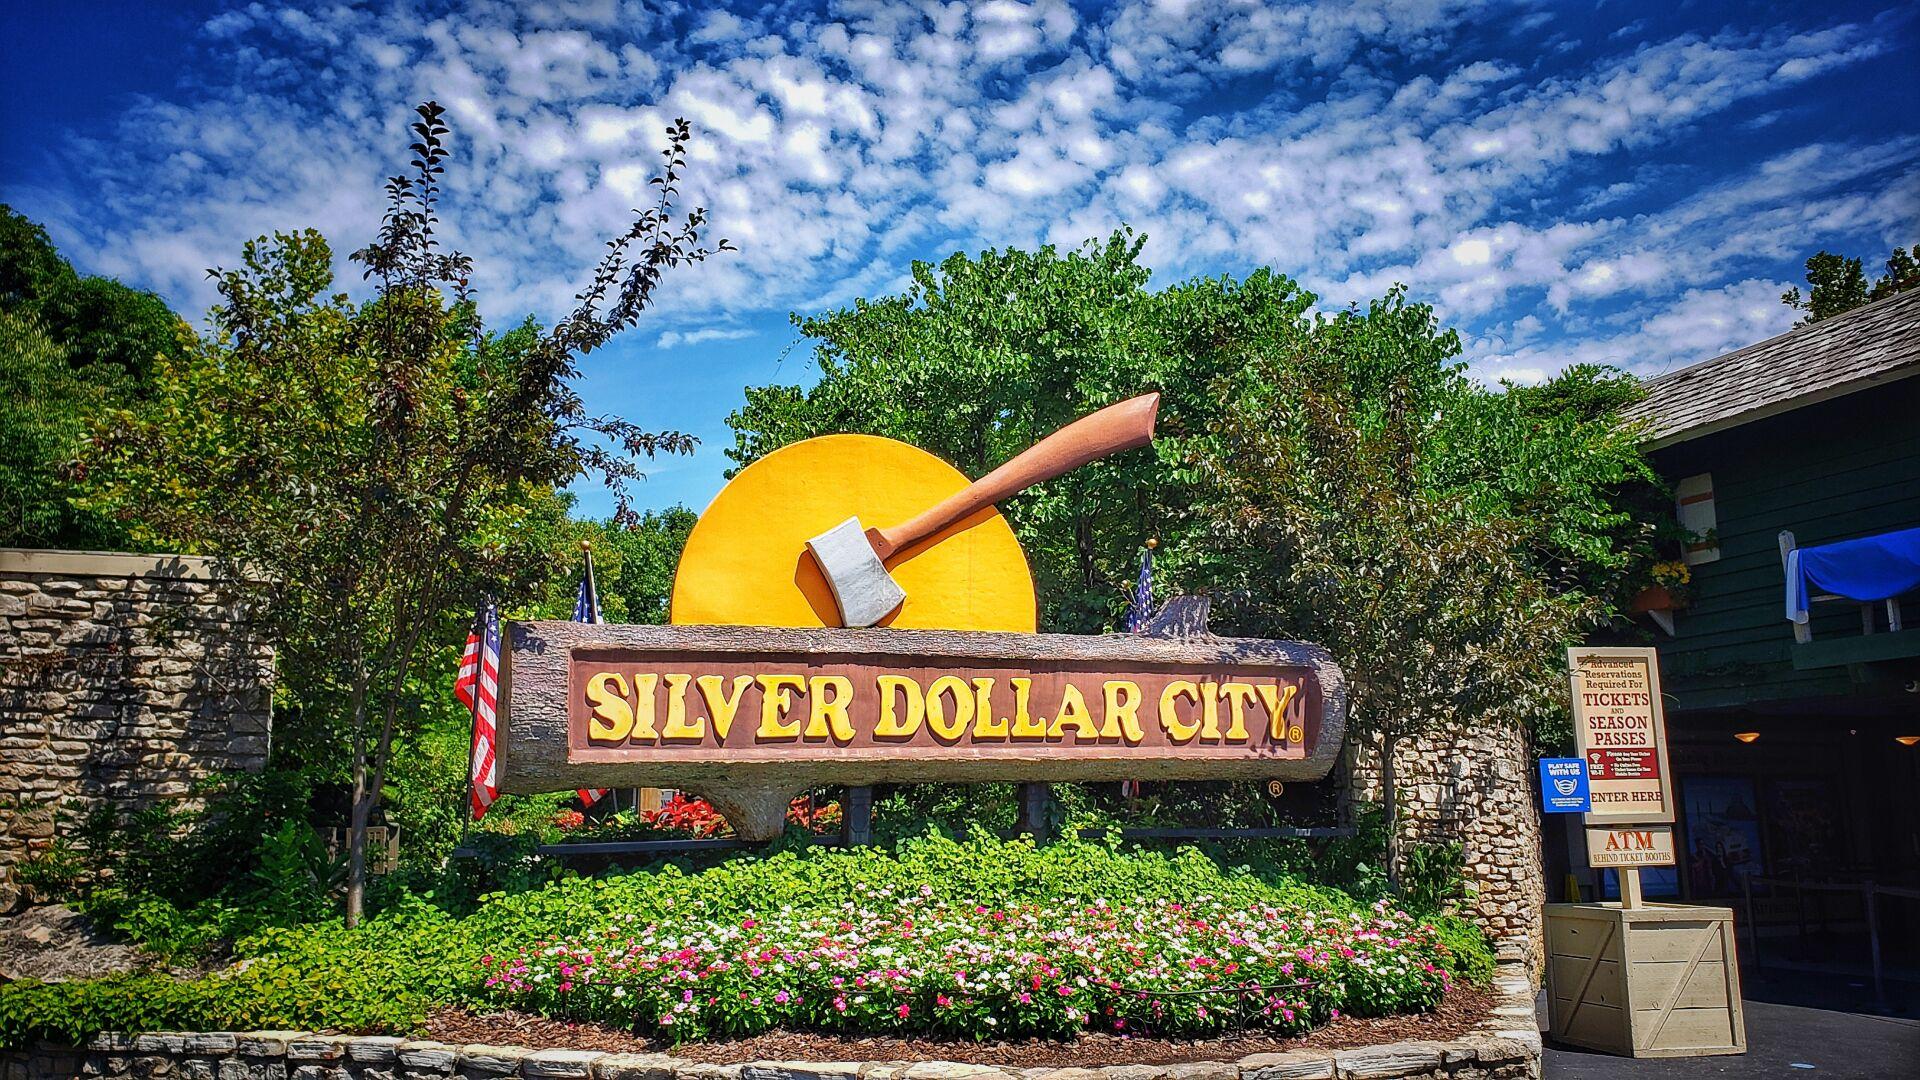 Silver Dollar City Diamond, Gold, Silver Passes Which to Get?